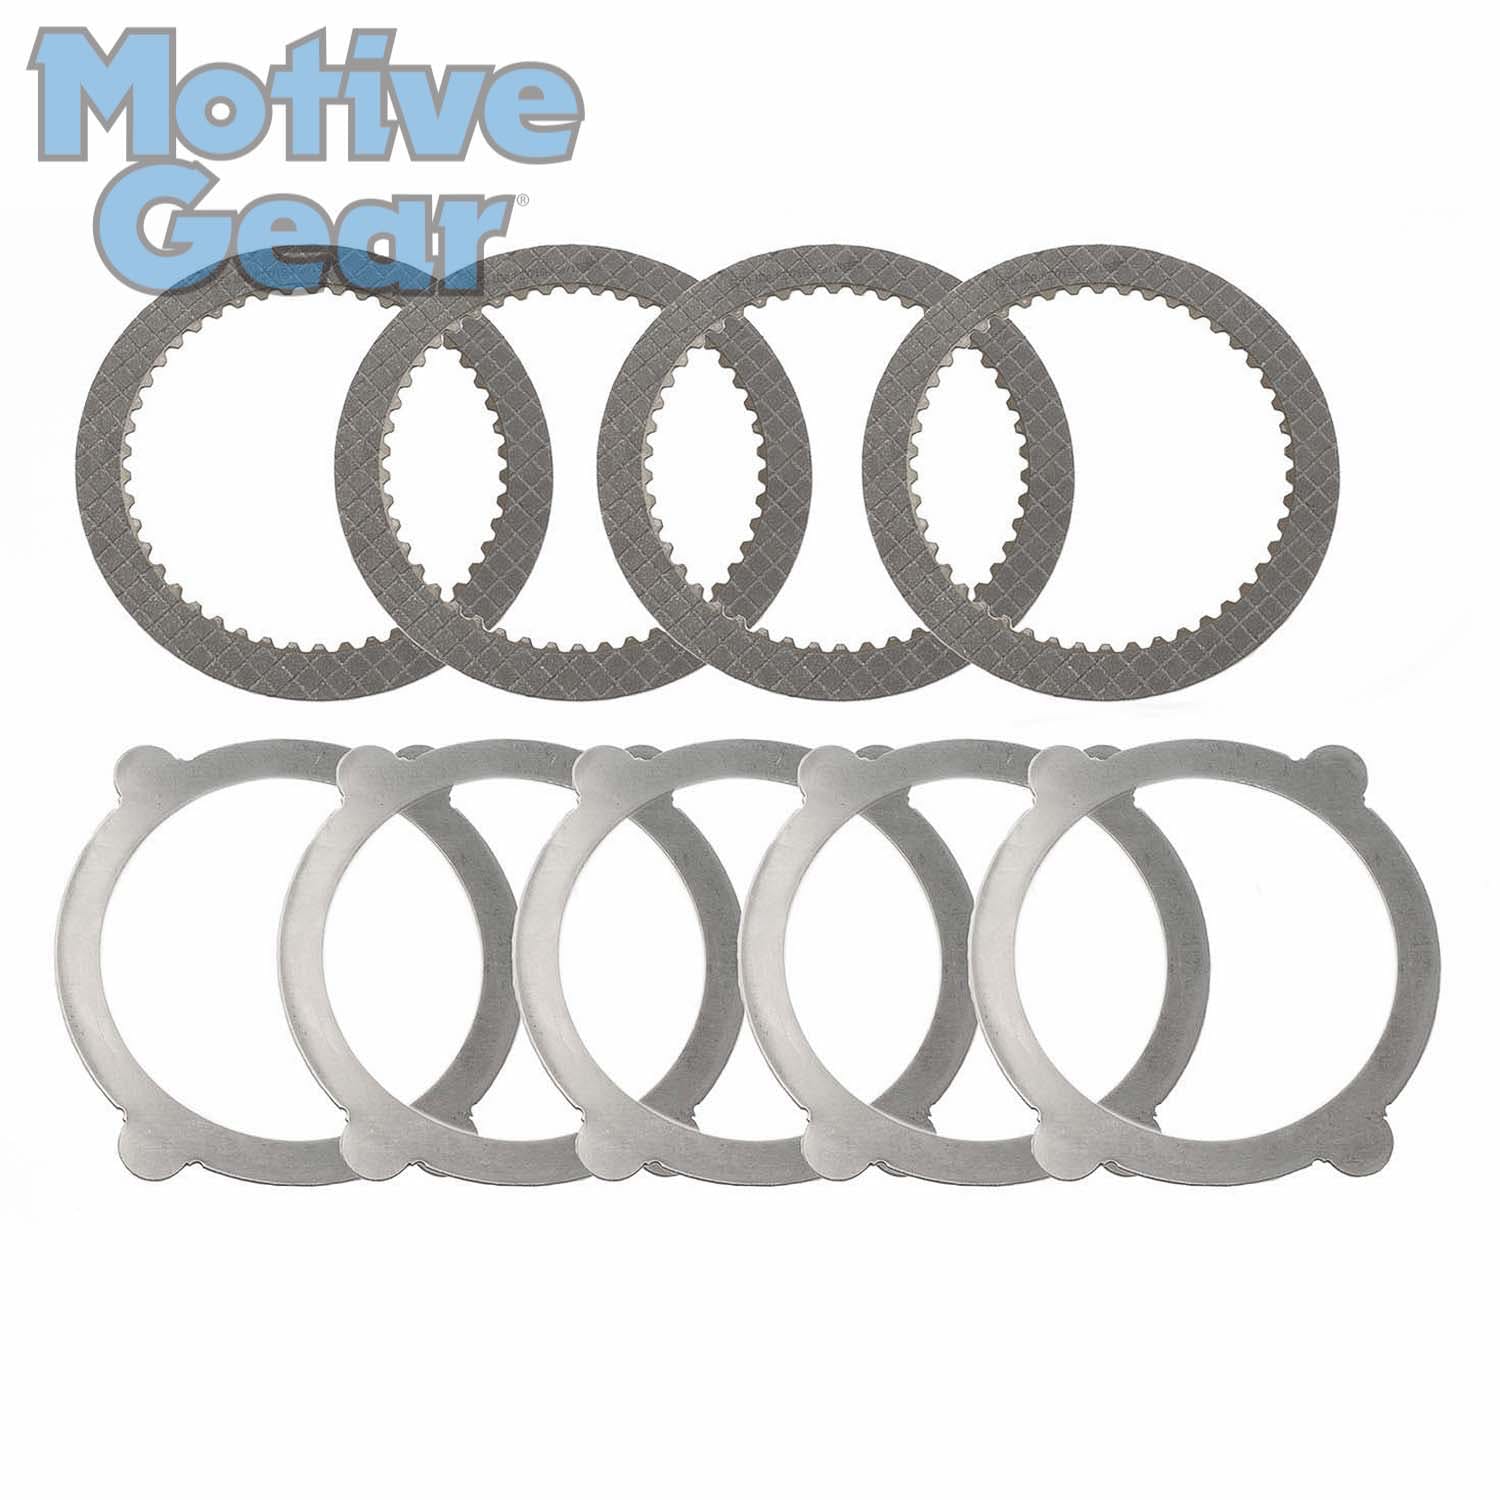 Motive Gear F9-CPK Differential Clutch Pack